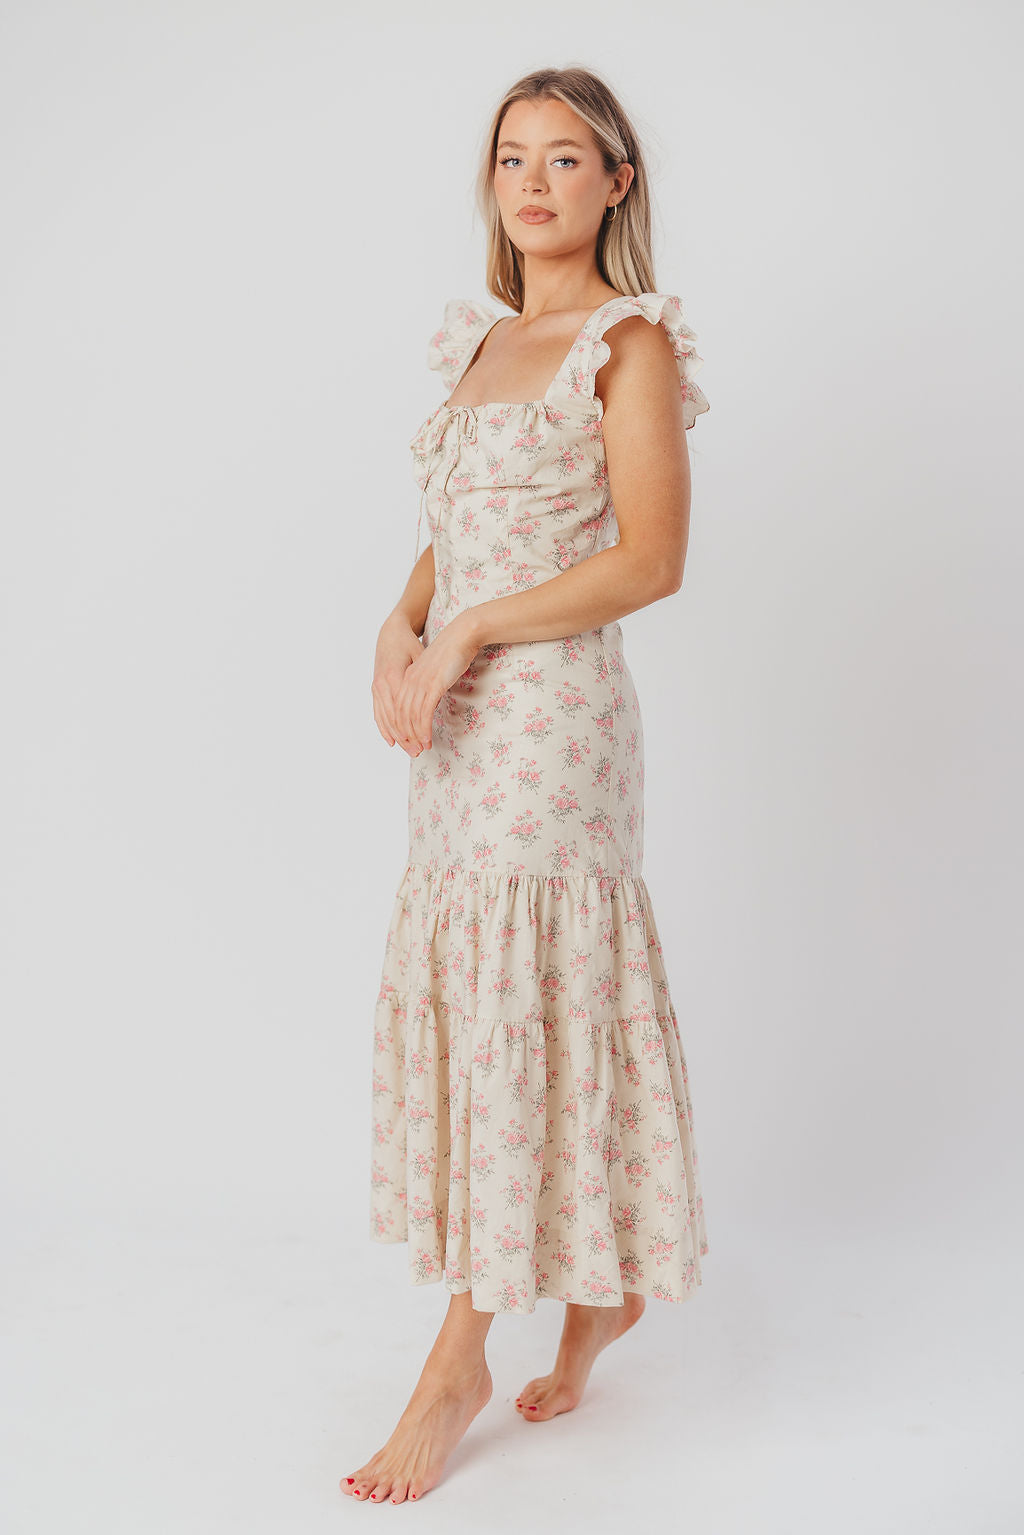 Emery Midi Dress in Pink and Cream (Sizes S-XL)